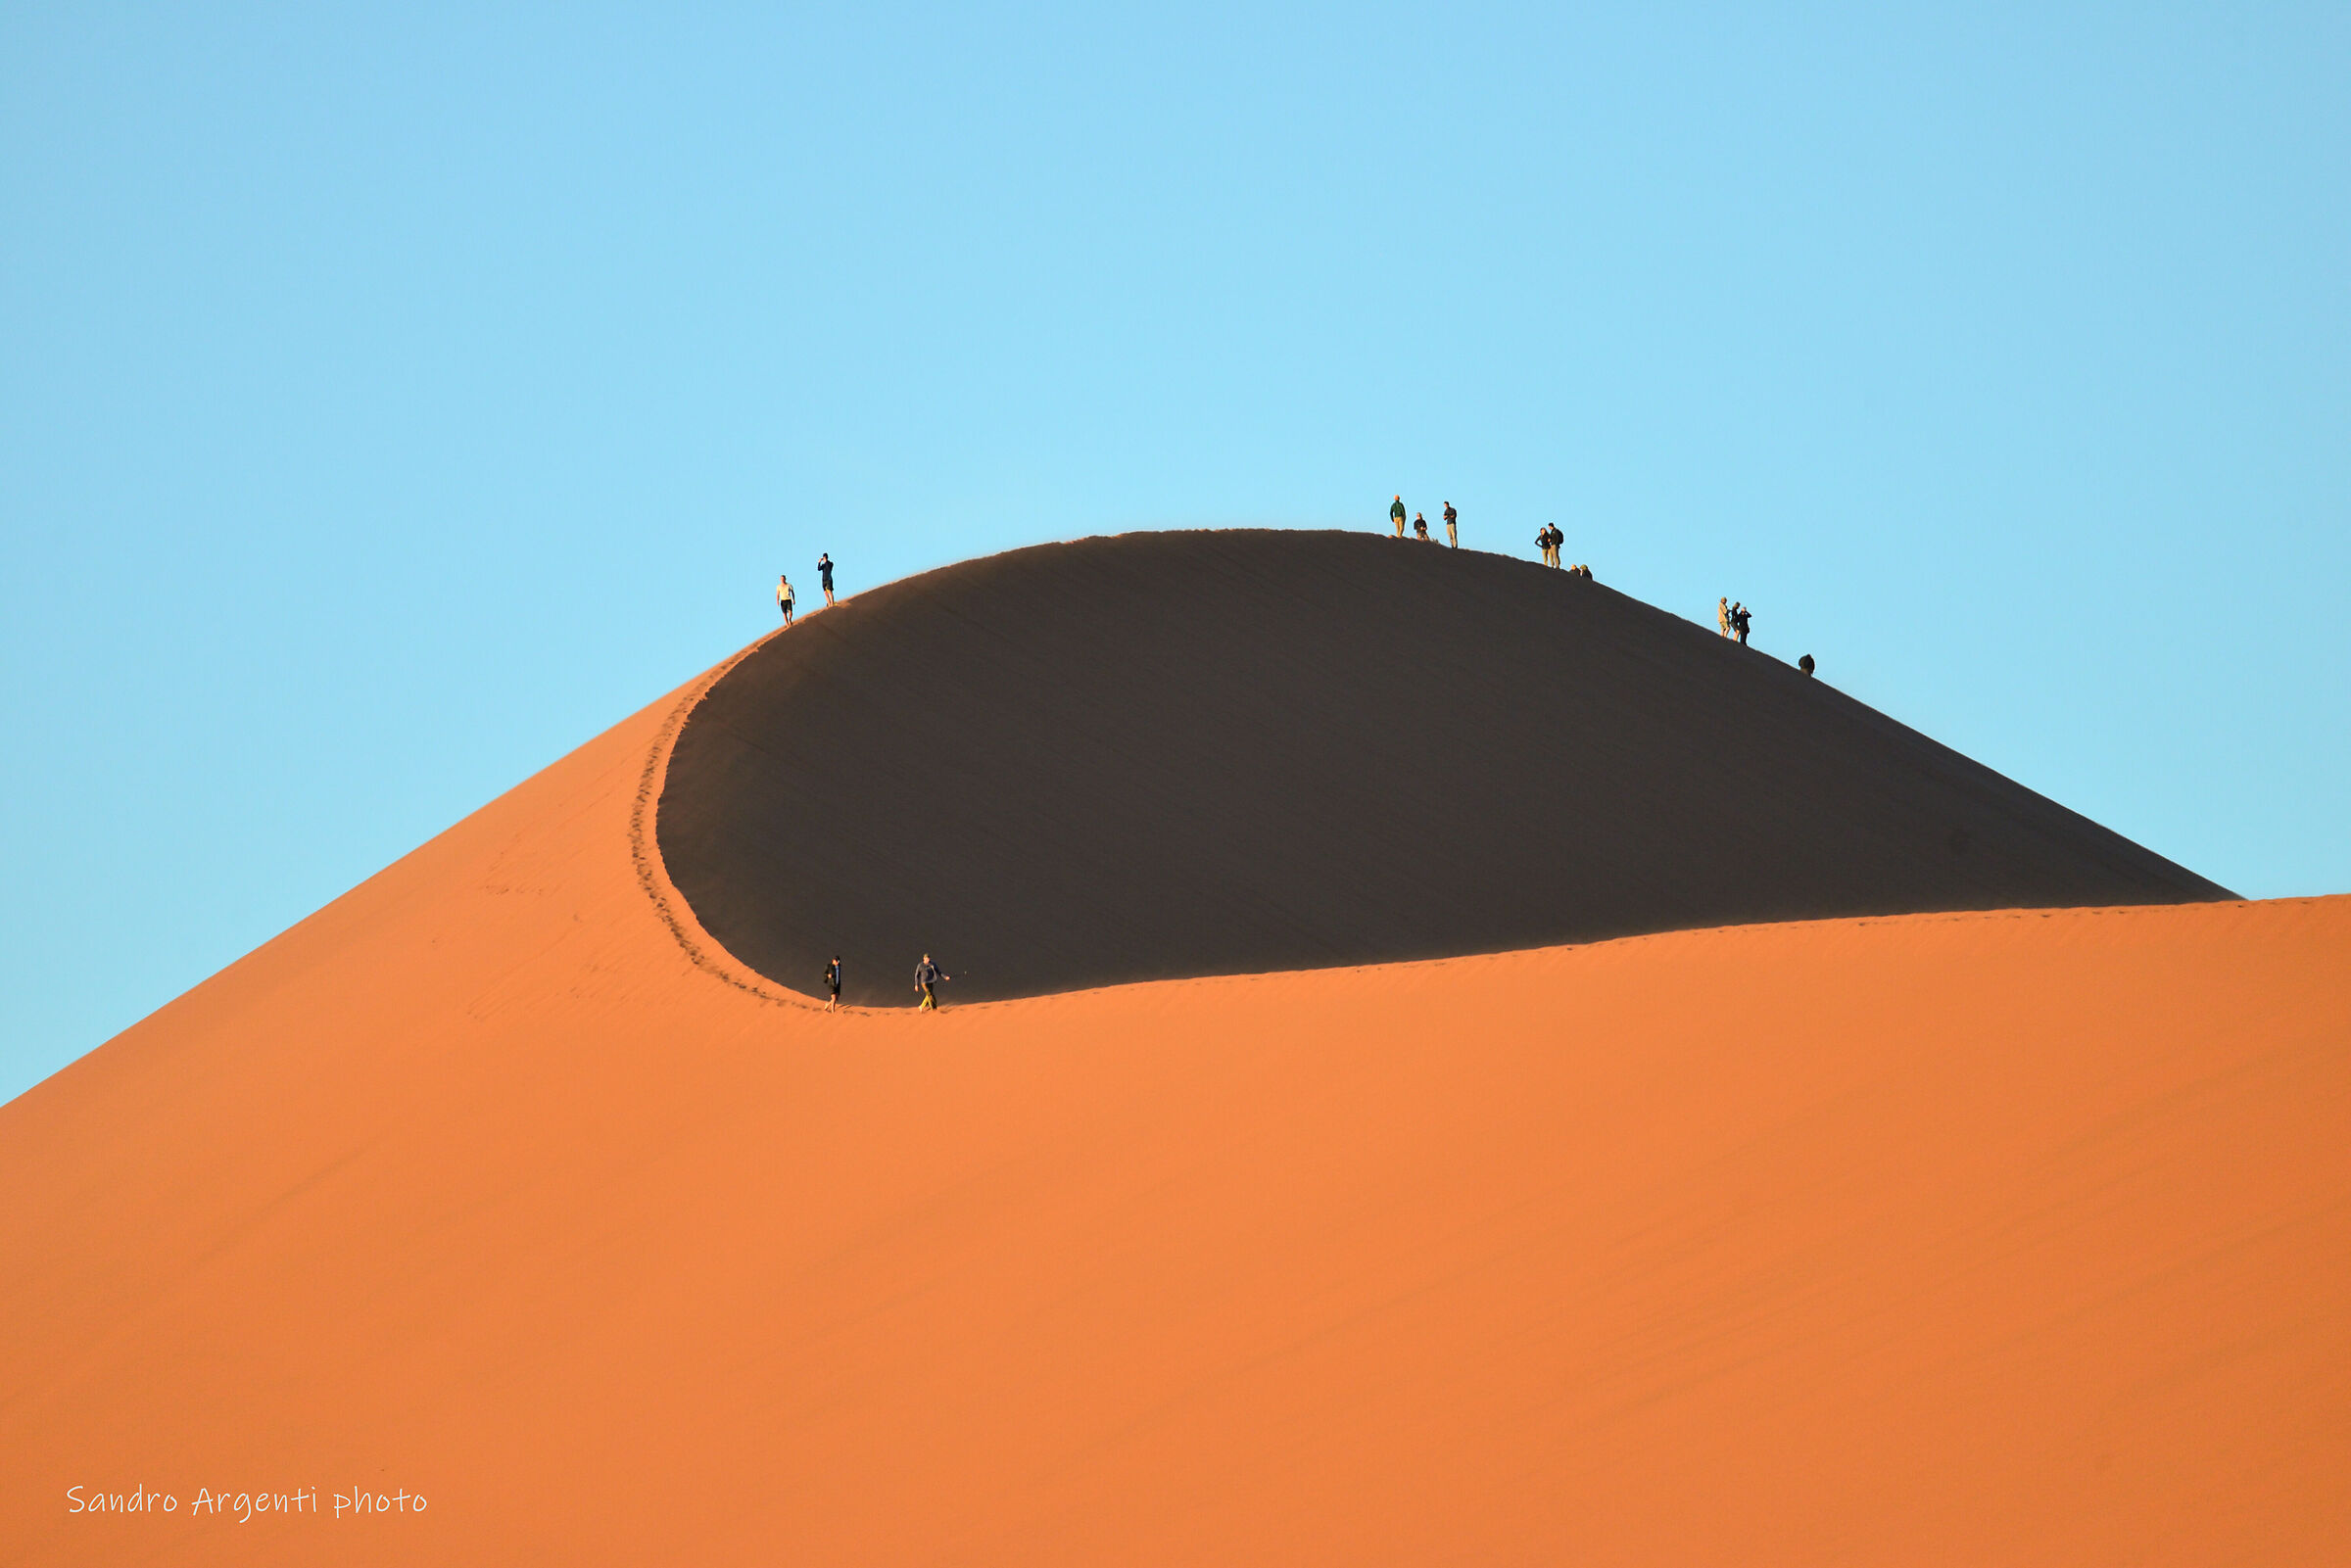 Walking on the crest of the dune. Namibia....